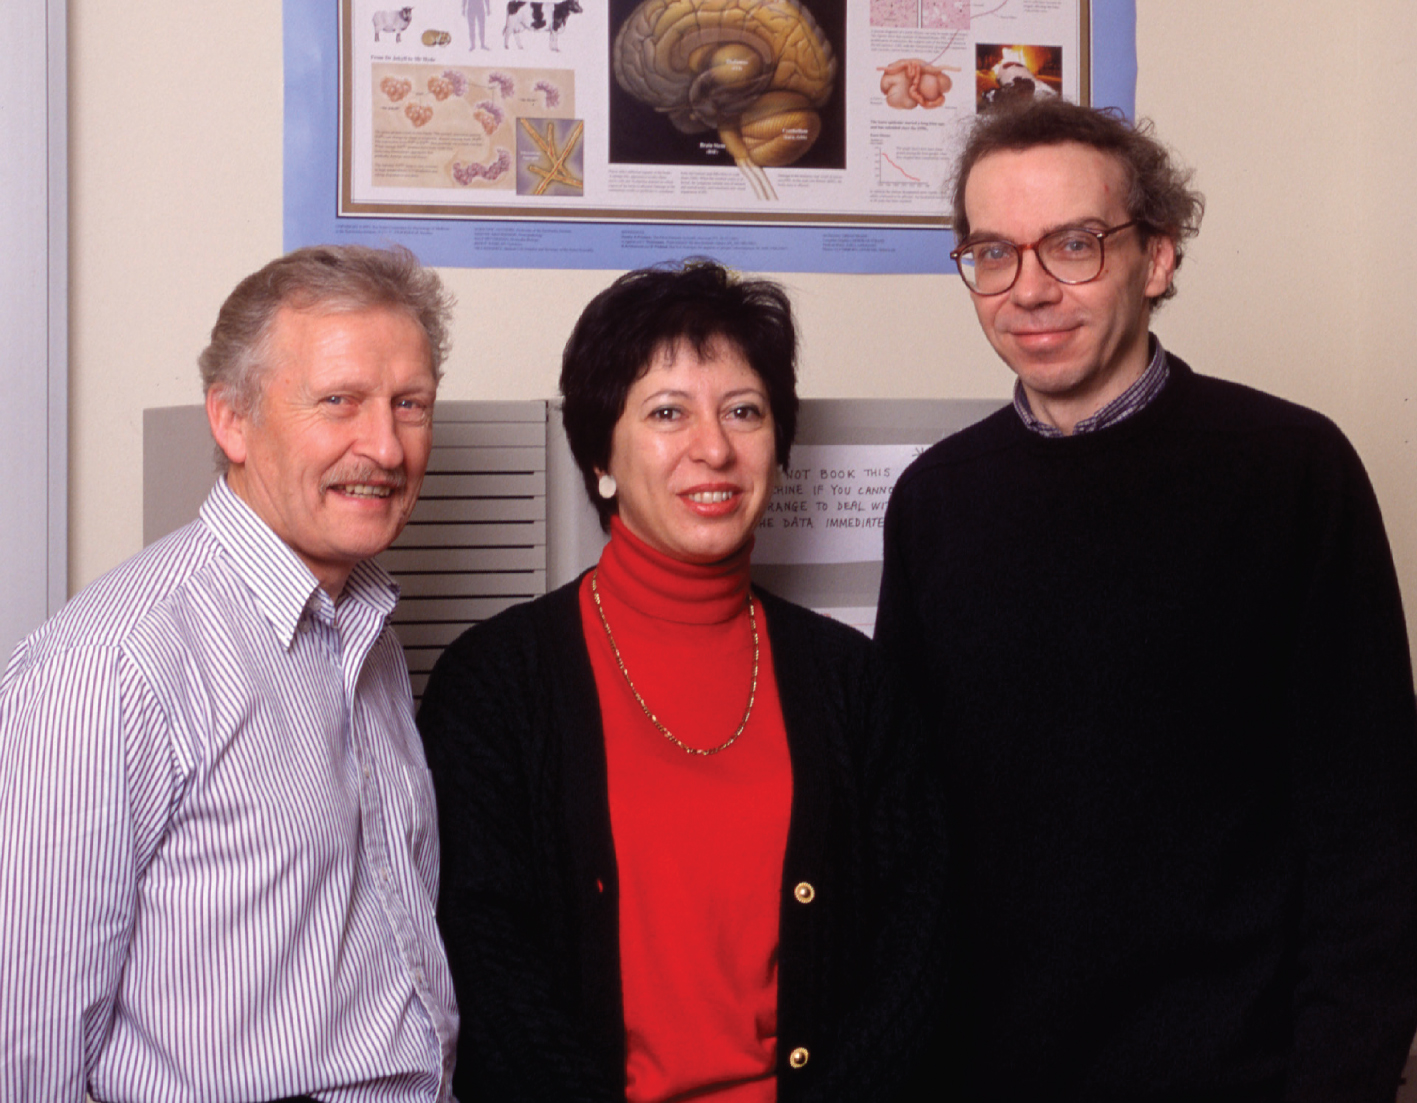 Twenty years ago: Ross Jakes, Maria Grazia Spillantini and Michel Goedert (from left to right) in 1997.